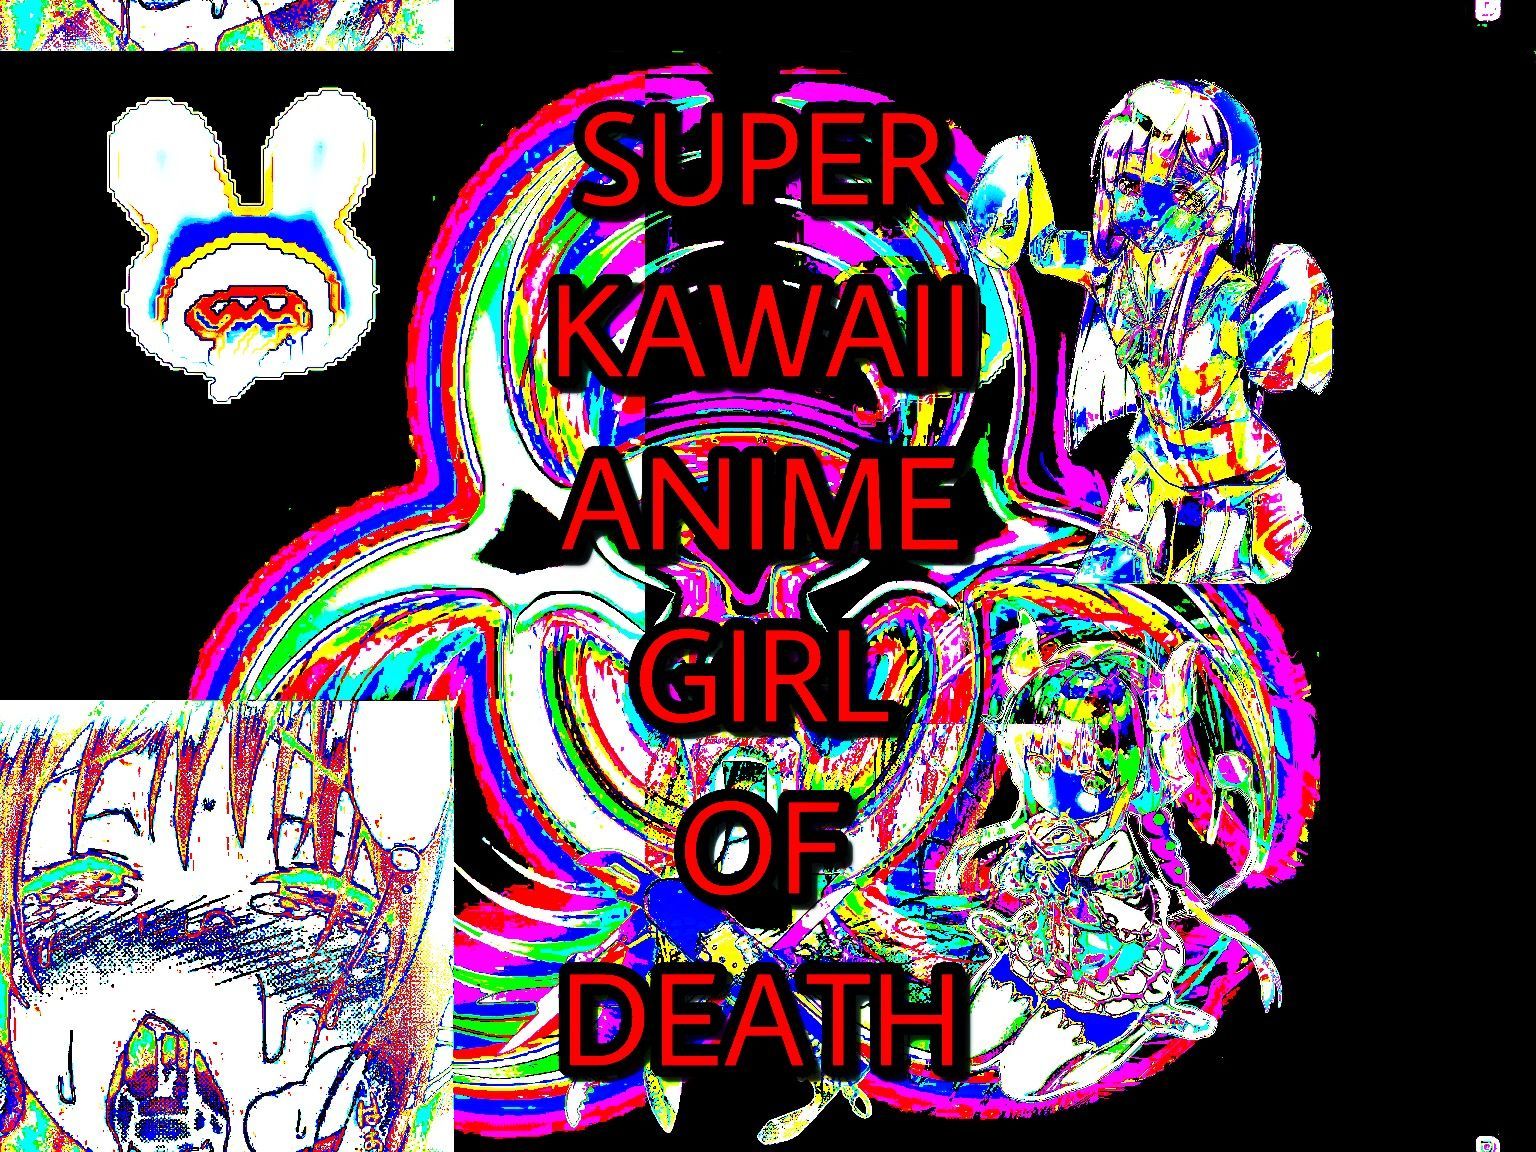 A poster with the words super kawaii anime girl of death - Webcore